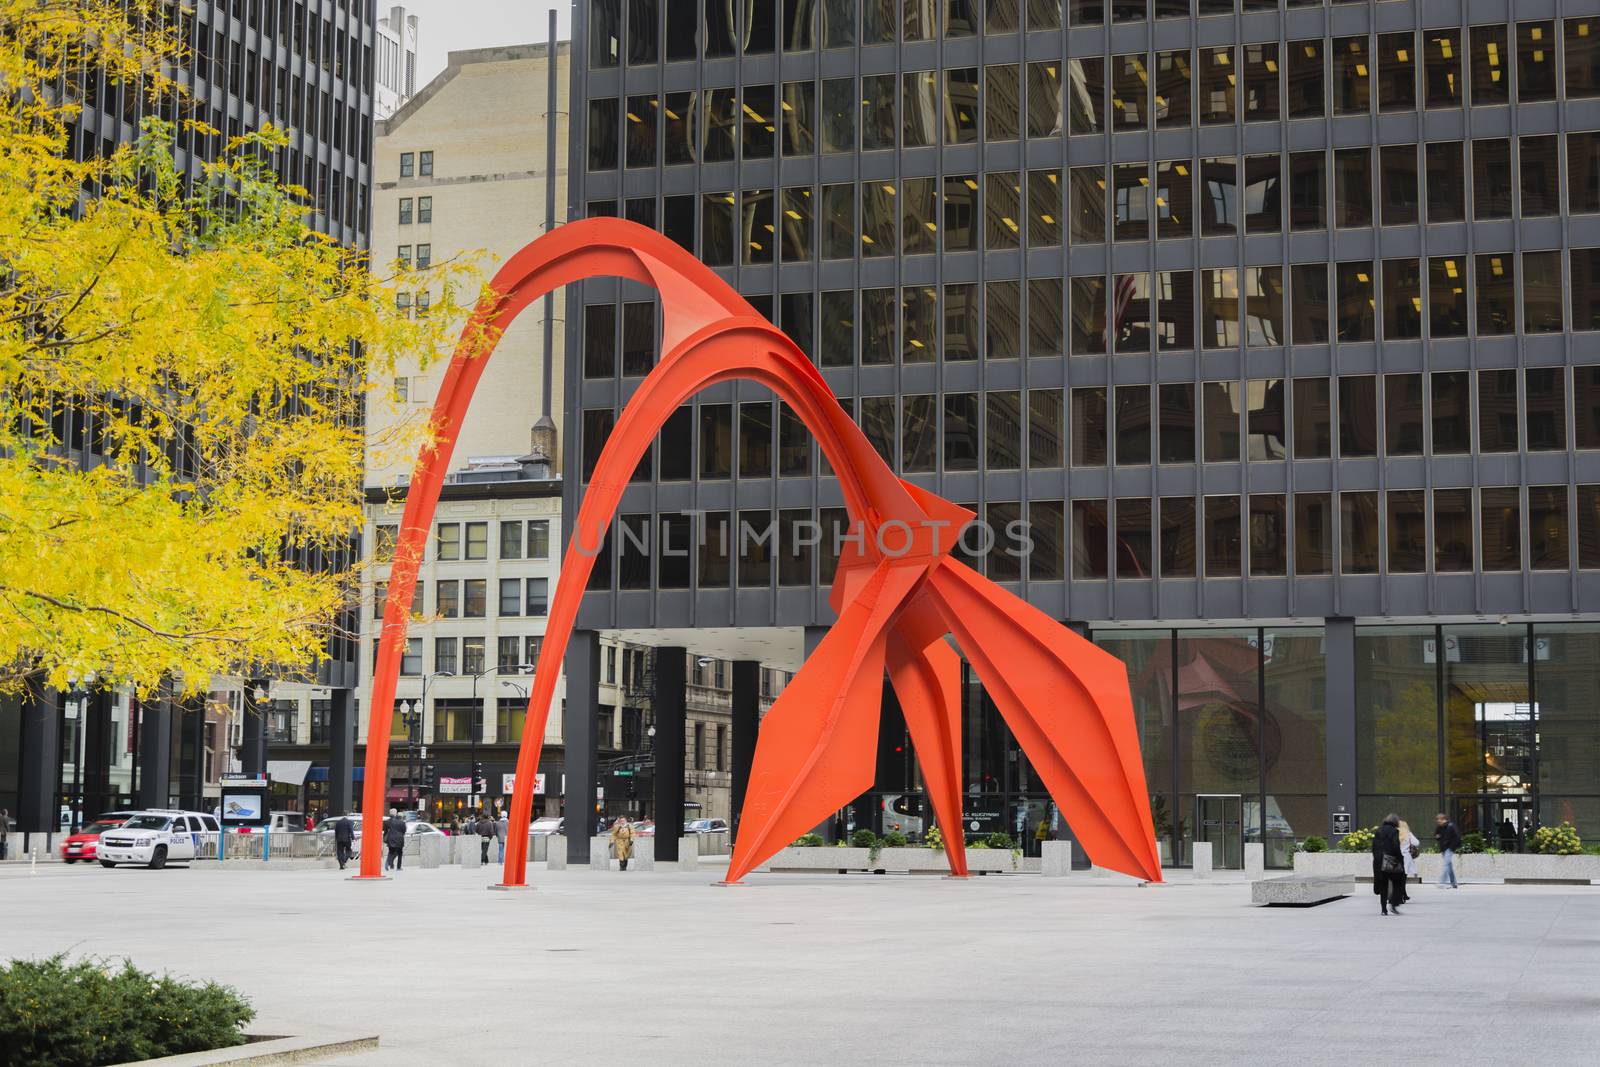 Chicago, IL, USA, october 27, 2016: Red Flamingo sculpture, created by artist Alexander Calder in 1973, located in the Federal Plaza in Chicago, Illinois, US